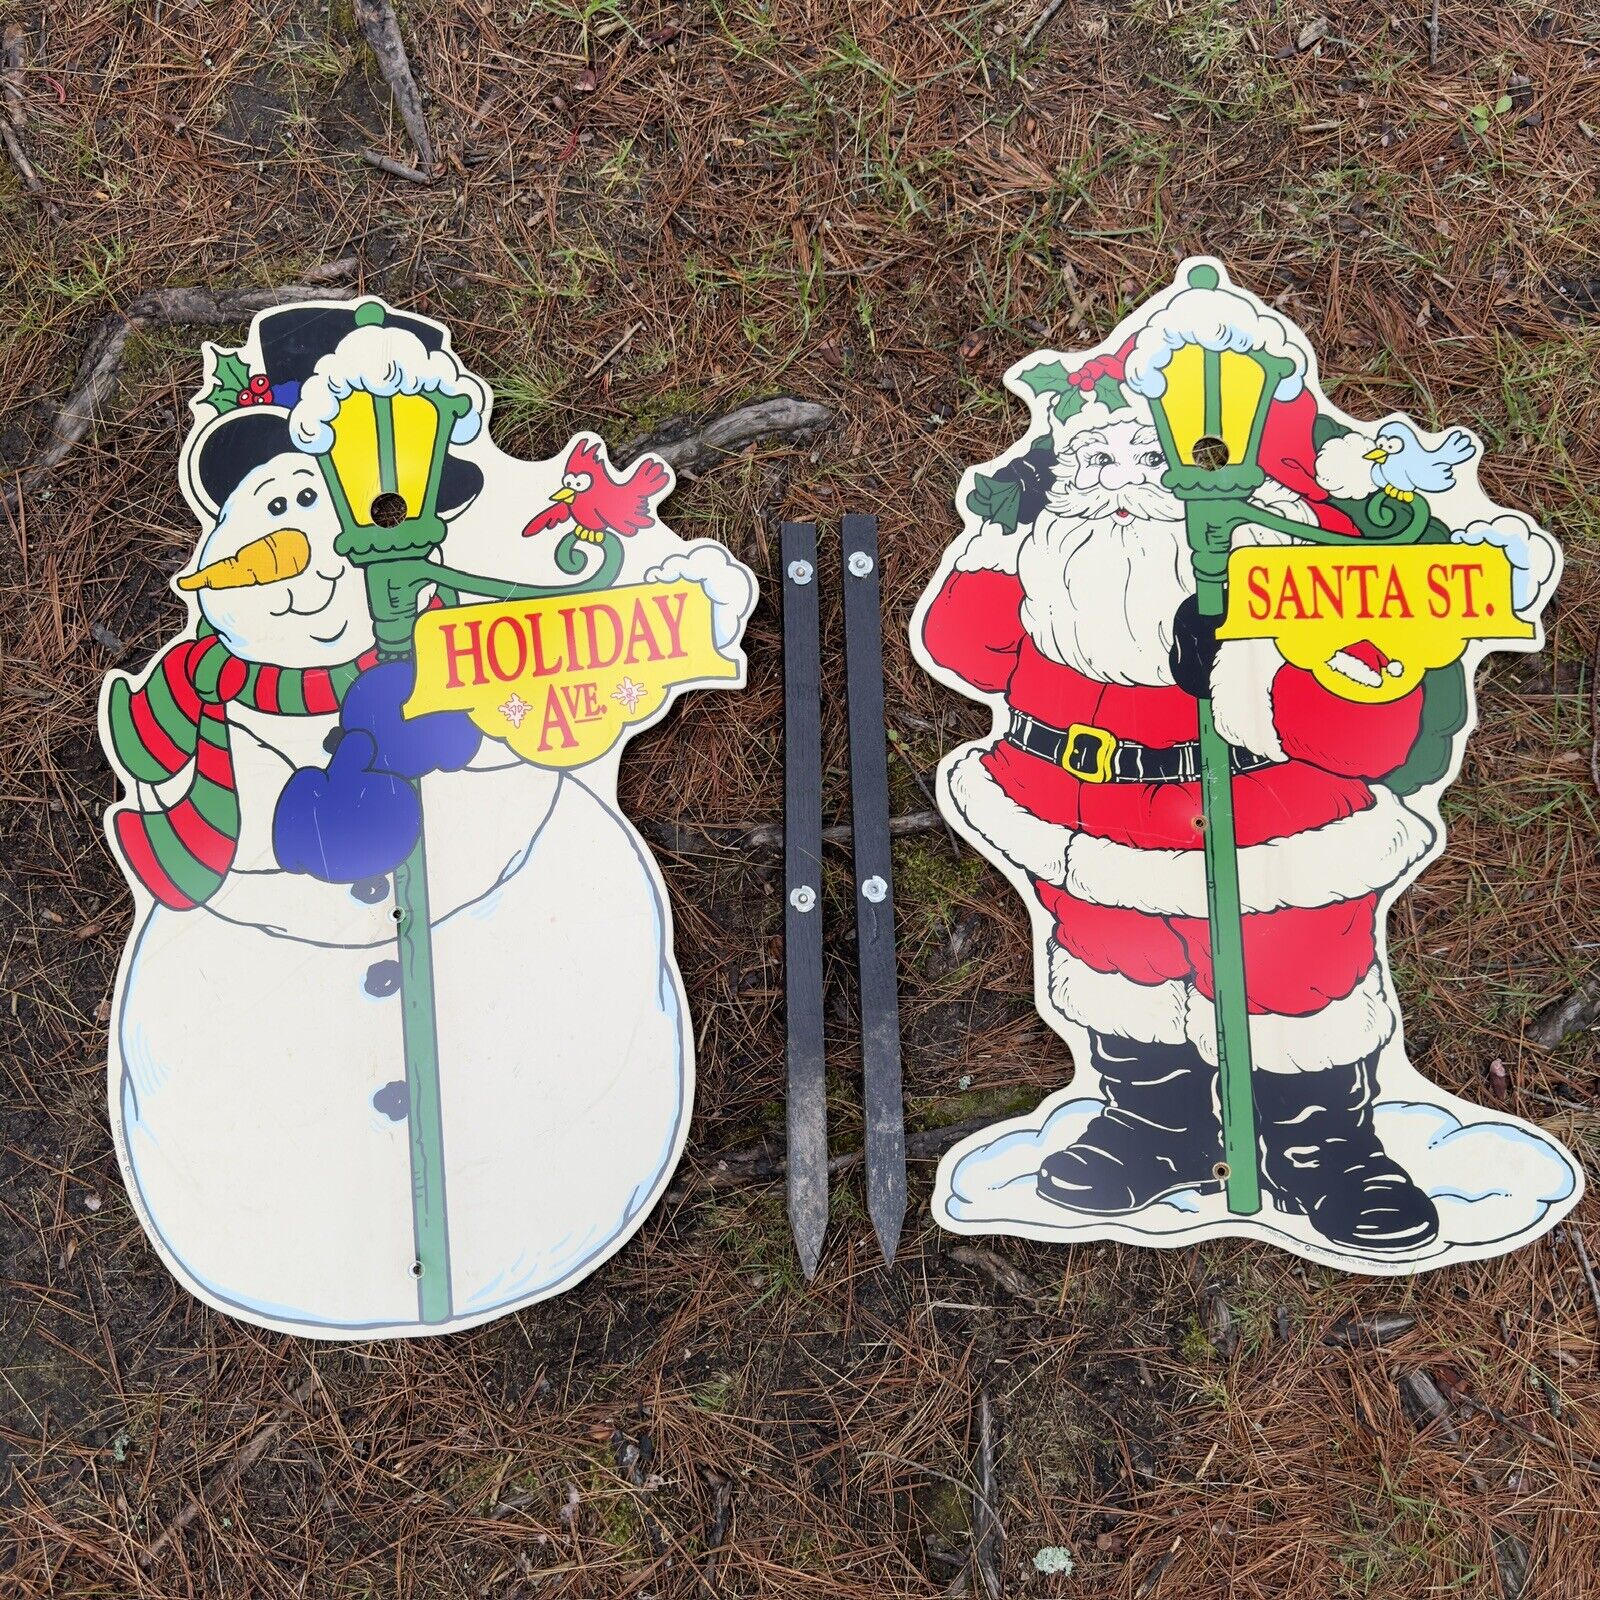 1996 Frosty the Snowman Santa Christmas Holiday Ave St Yard Sign Impact Plastic